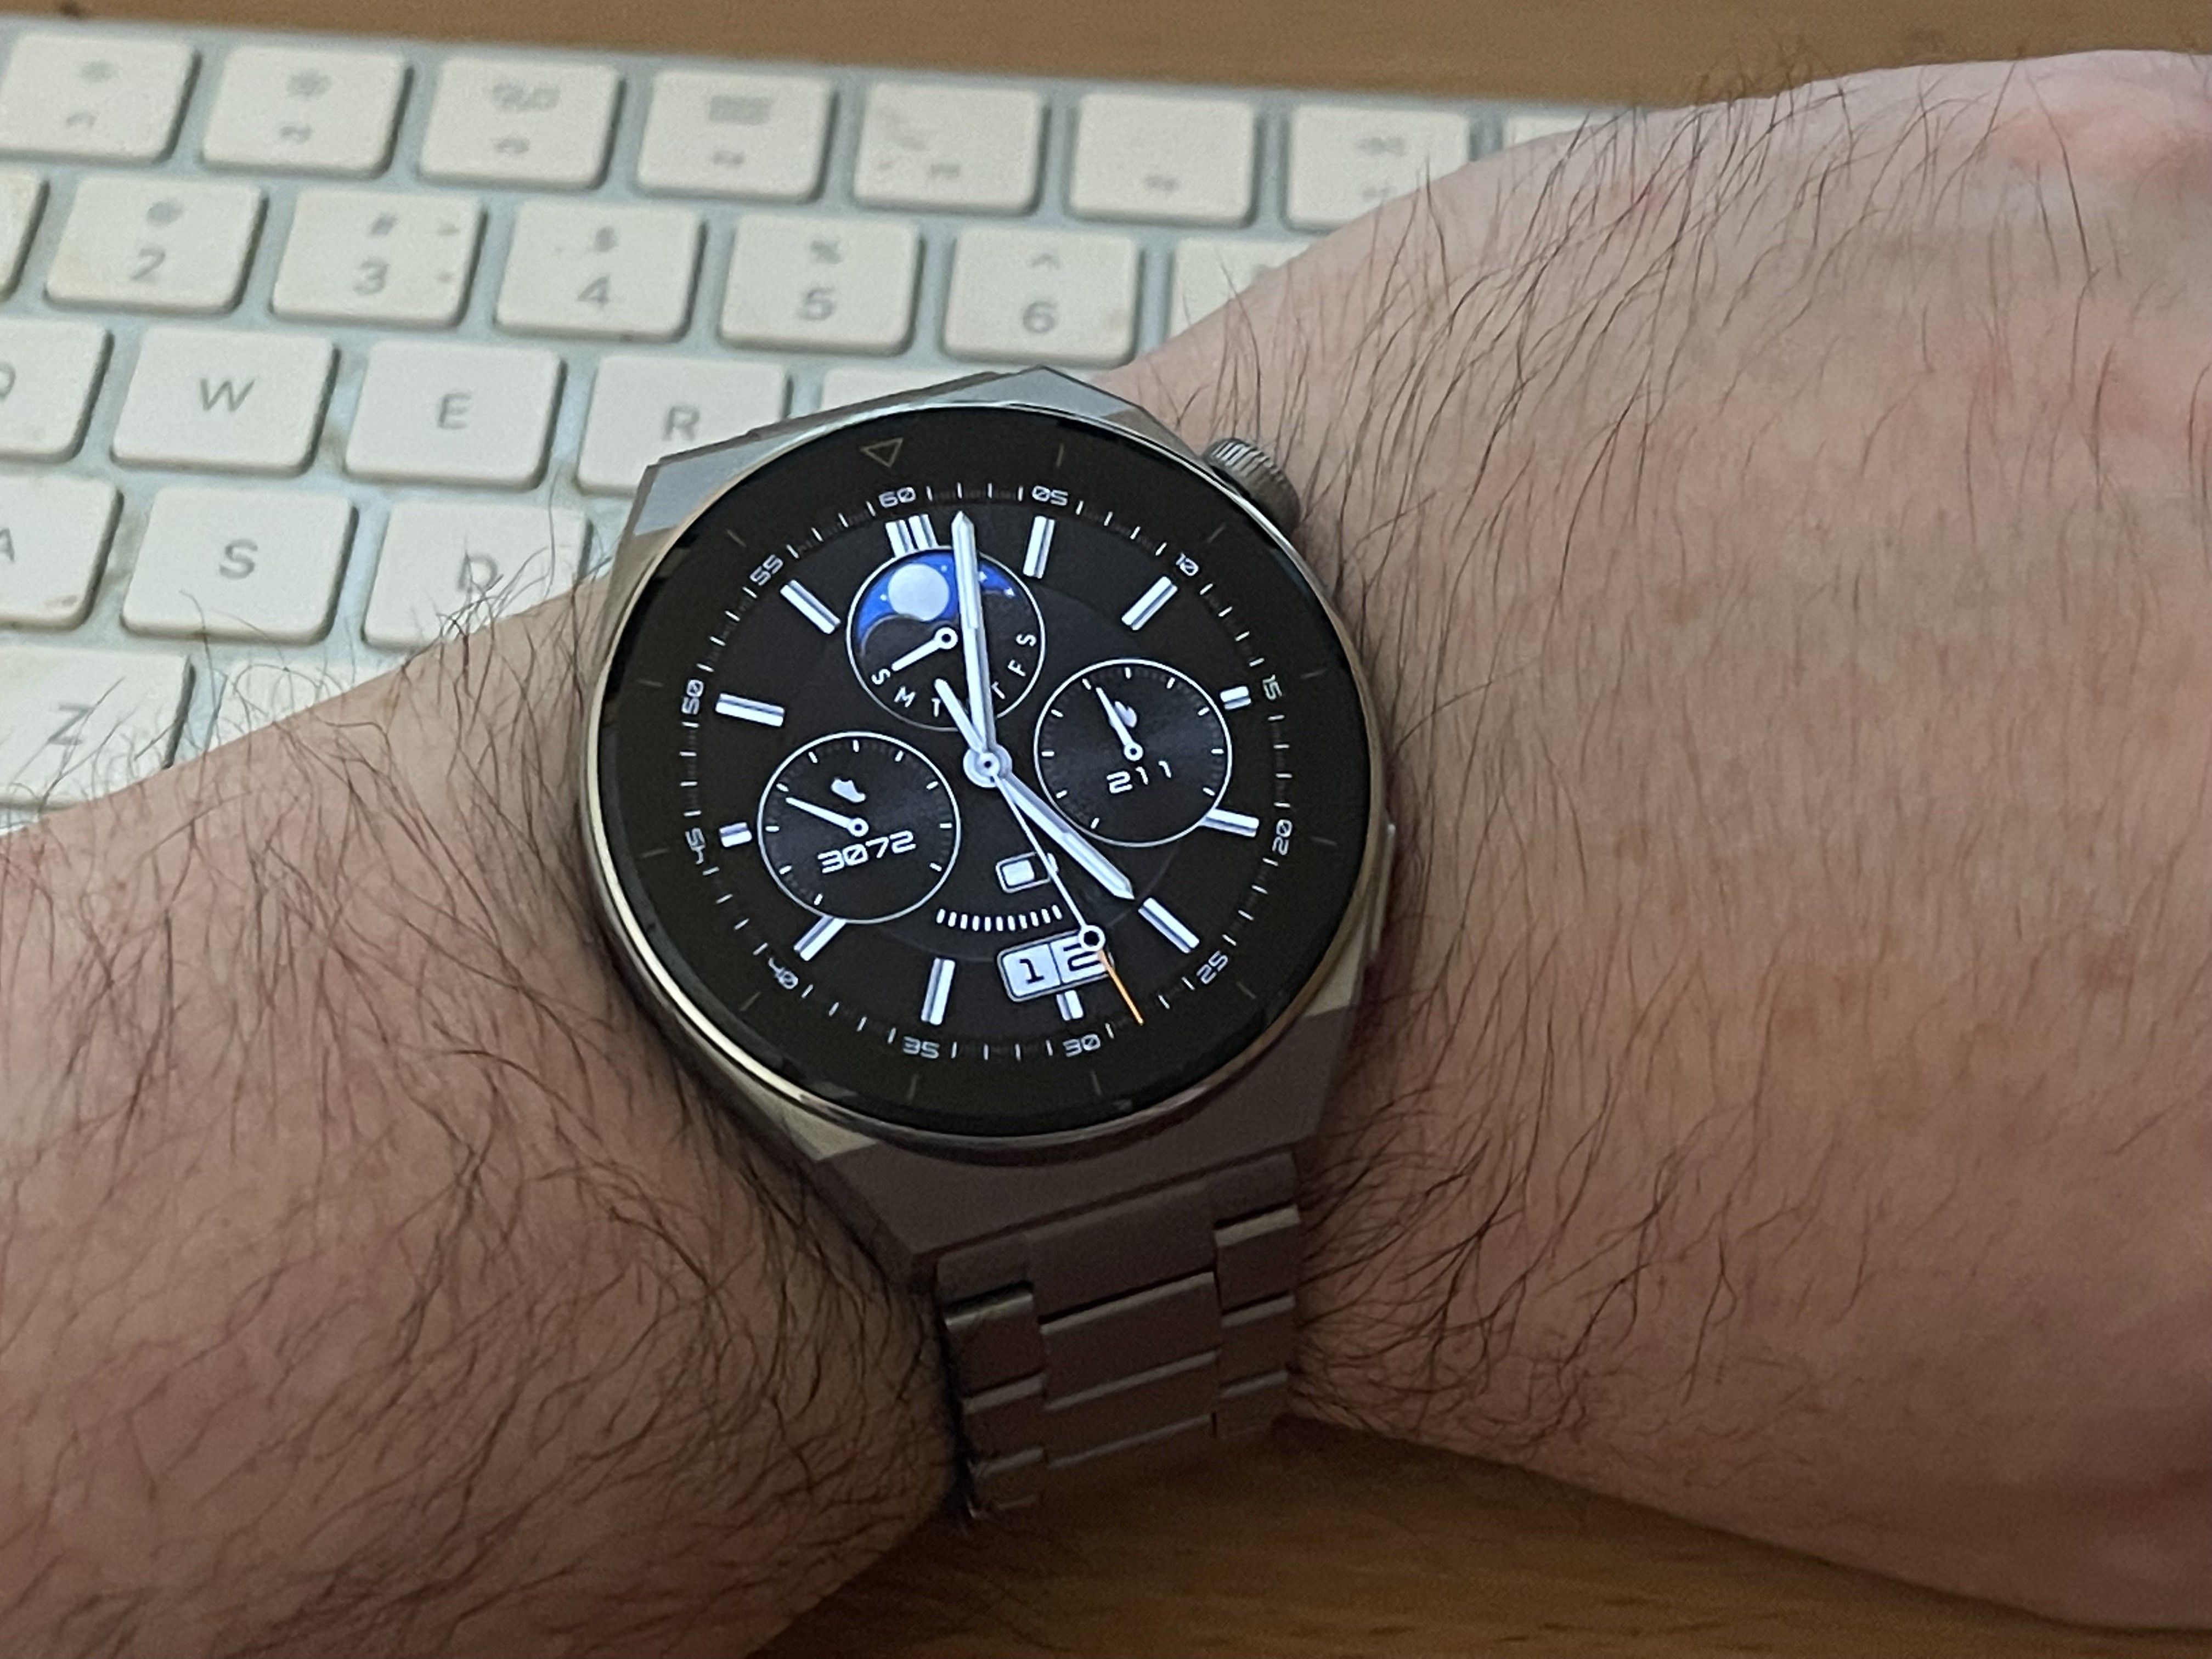 Watch GT 3 Pro review: The most beautiful watch HUAWEI ever made